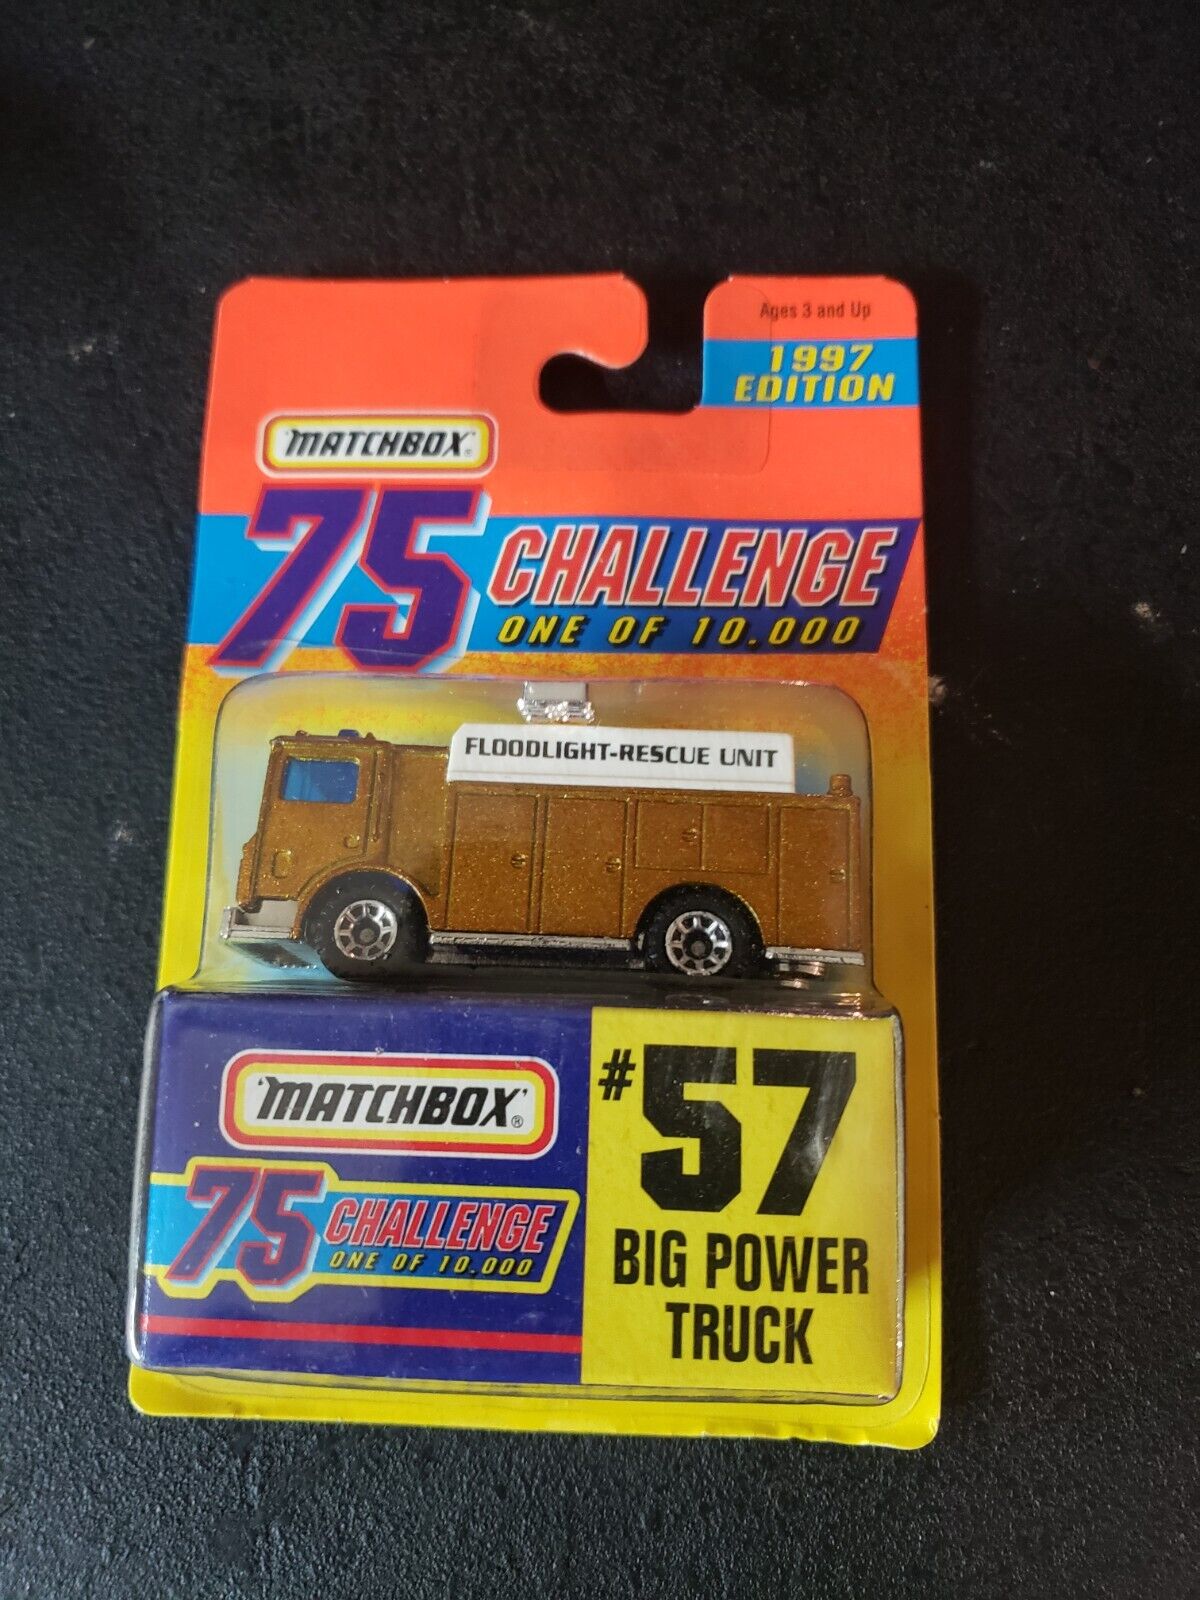 Matchbox 75 Challenge 1997 Edition #57 big power truck new on a sealed card